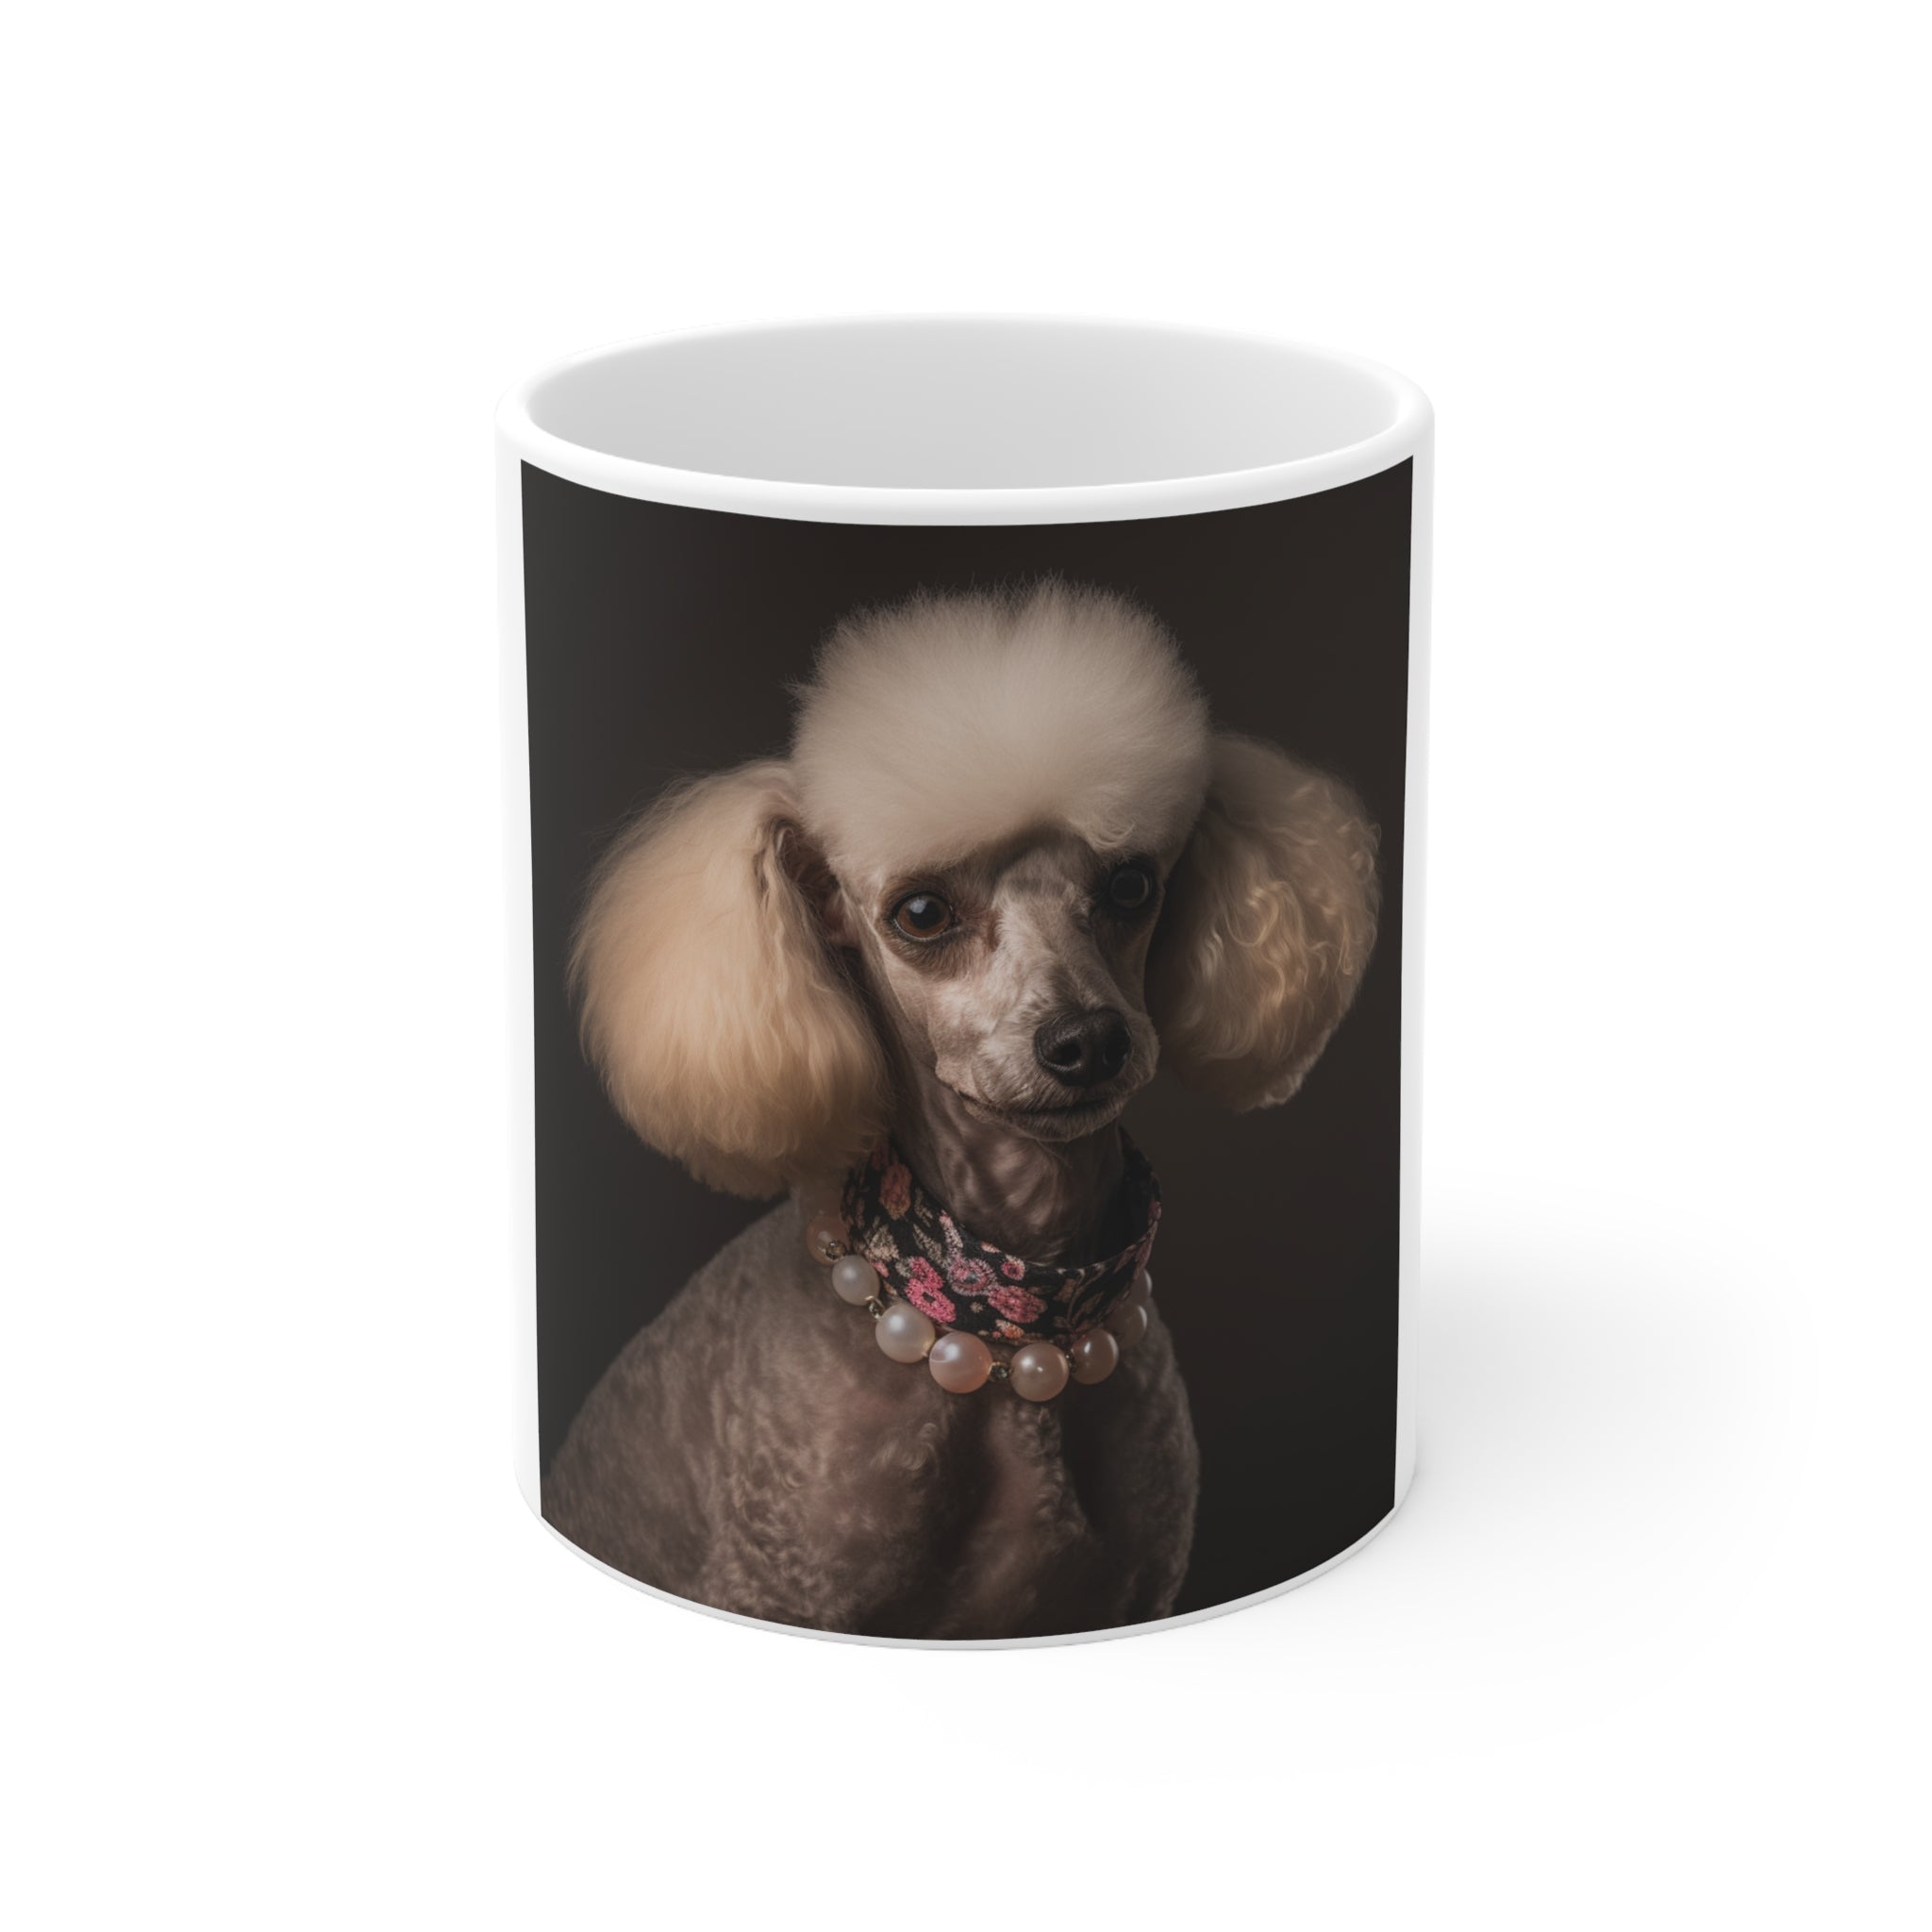 🐶Poodle For Your Thoughts Dog Photo Ceramic Mug 11oz - Personalized Pet Mug for Dog Lovers | Cherish Your Canine Companion with Every Sip